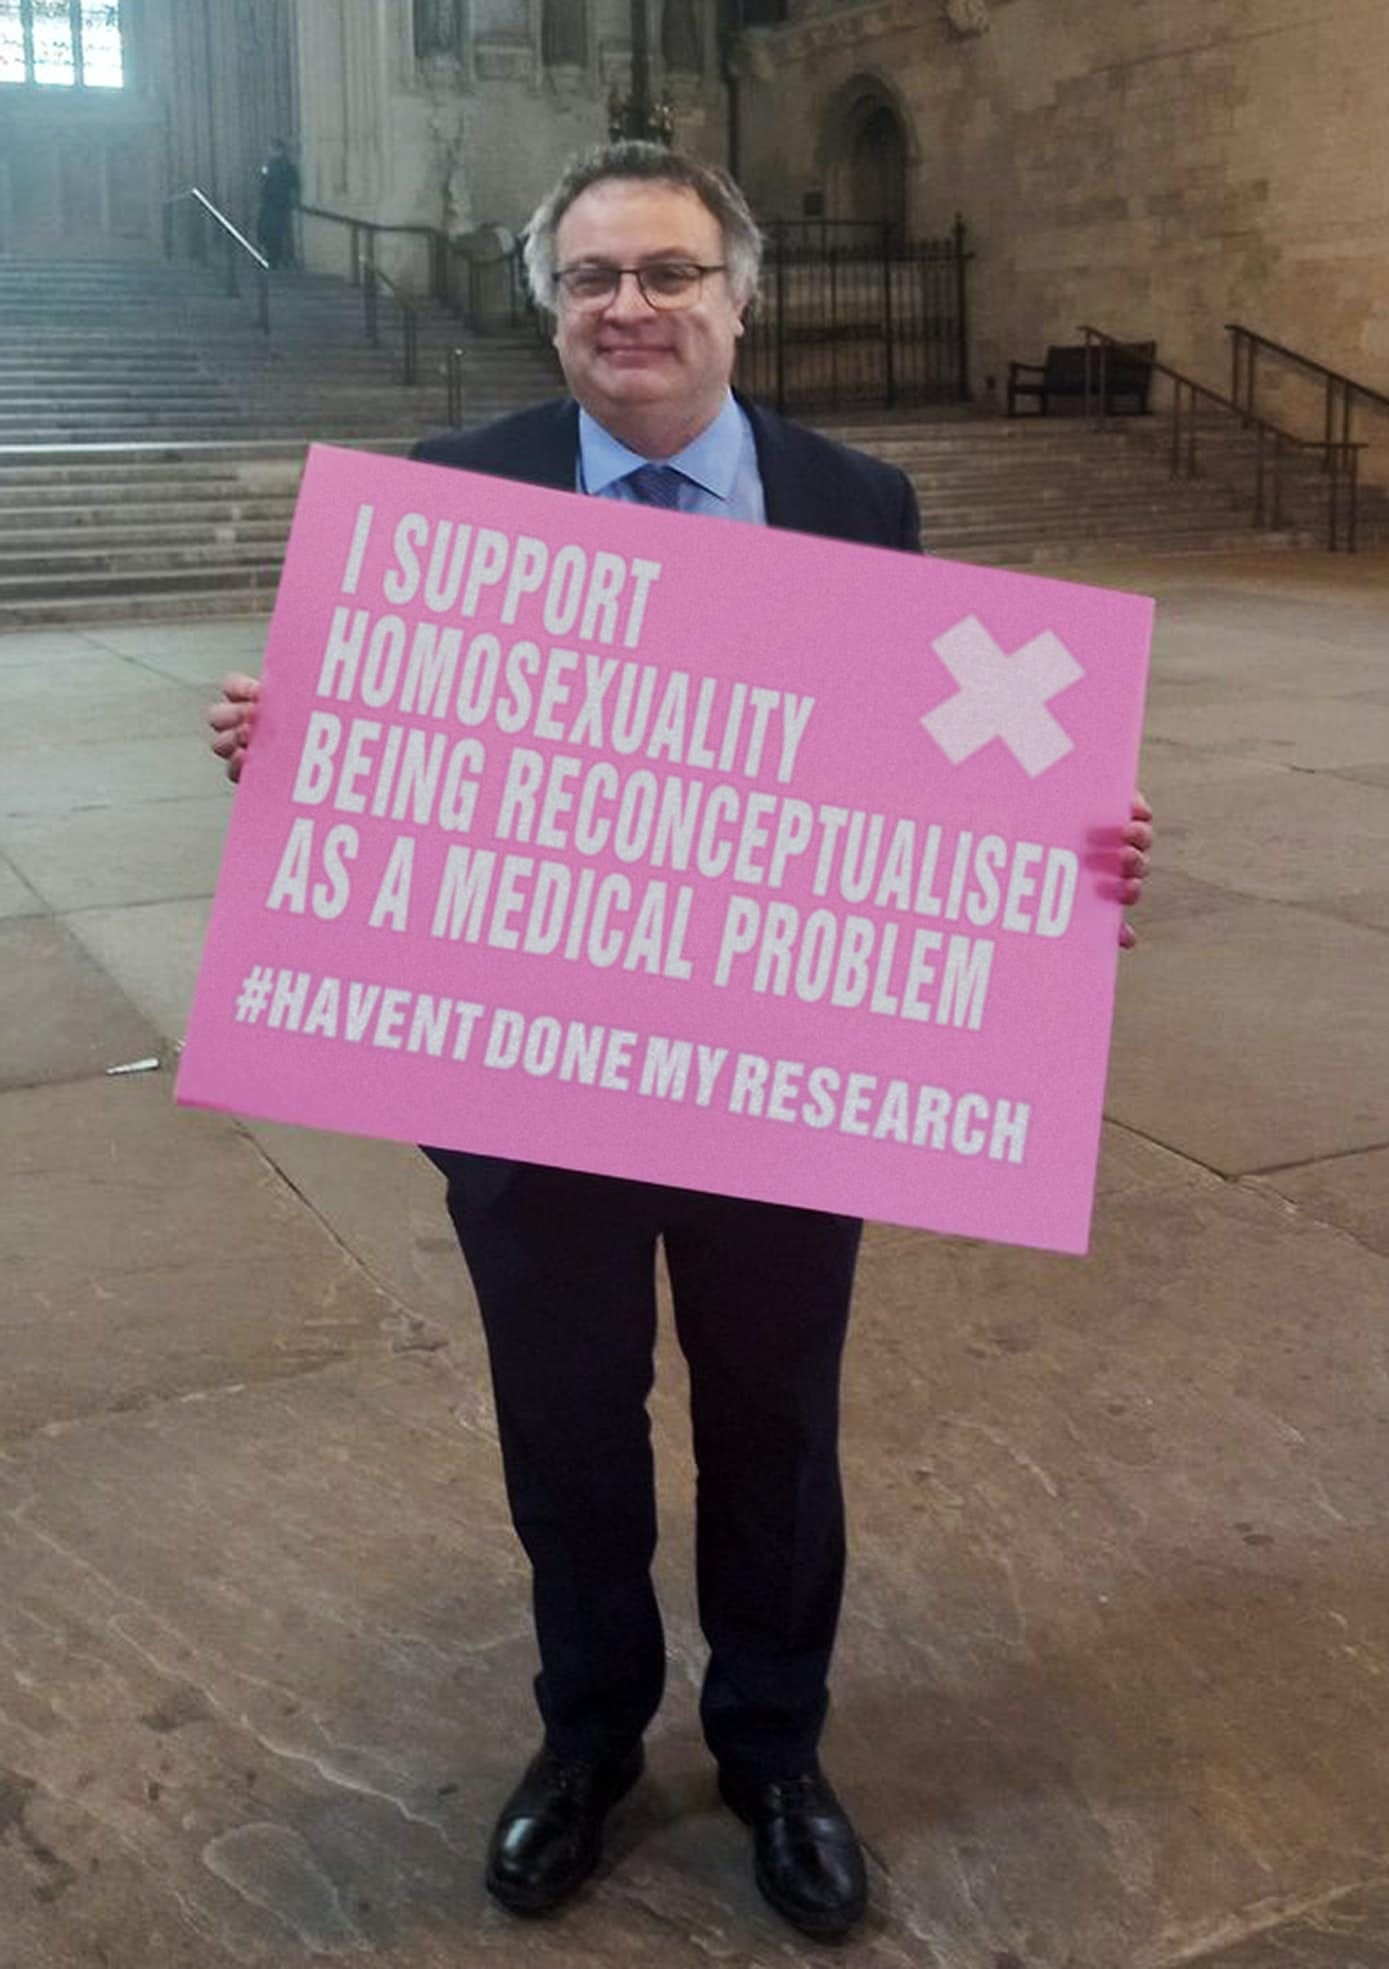 May be an image of 1 person, standing and text that says '|SUPPORT BEING HOMOSEXUALITY AS A MEDICAL RECONCEPTUALISED #HAVENT DONE PROBLEM RESEARCH'